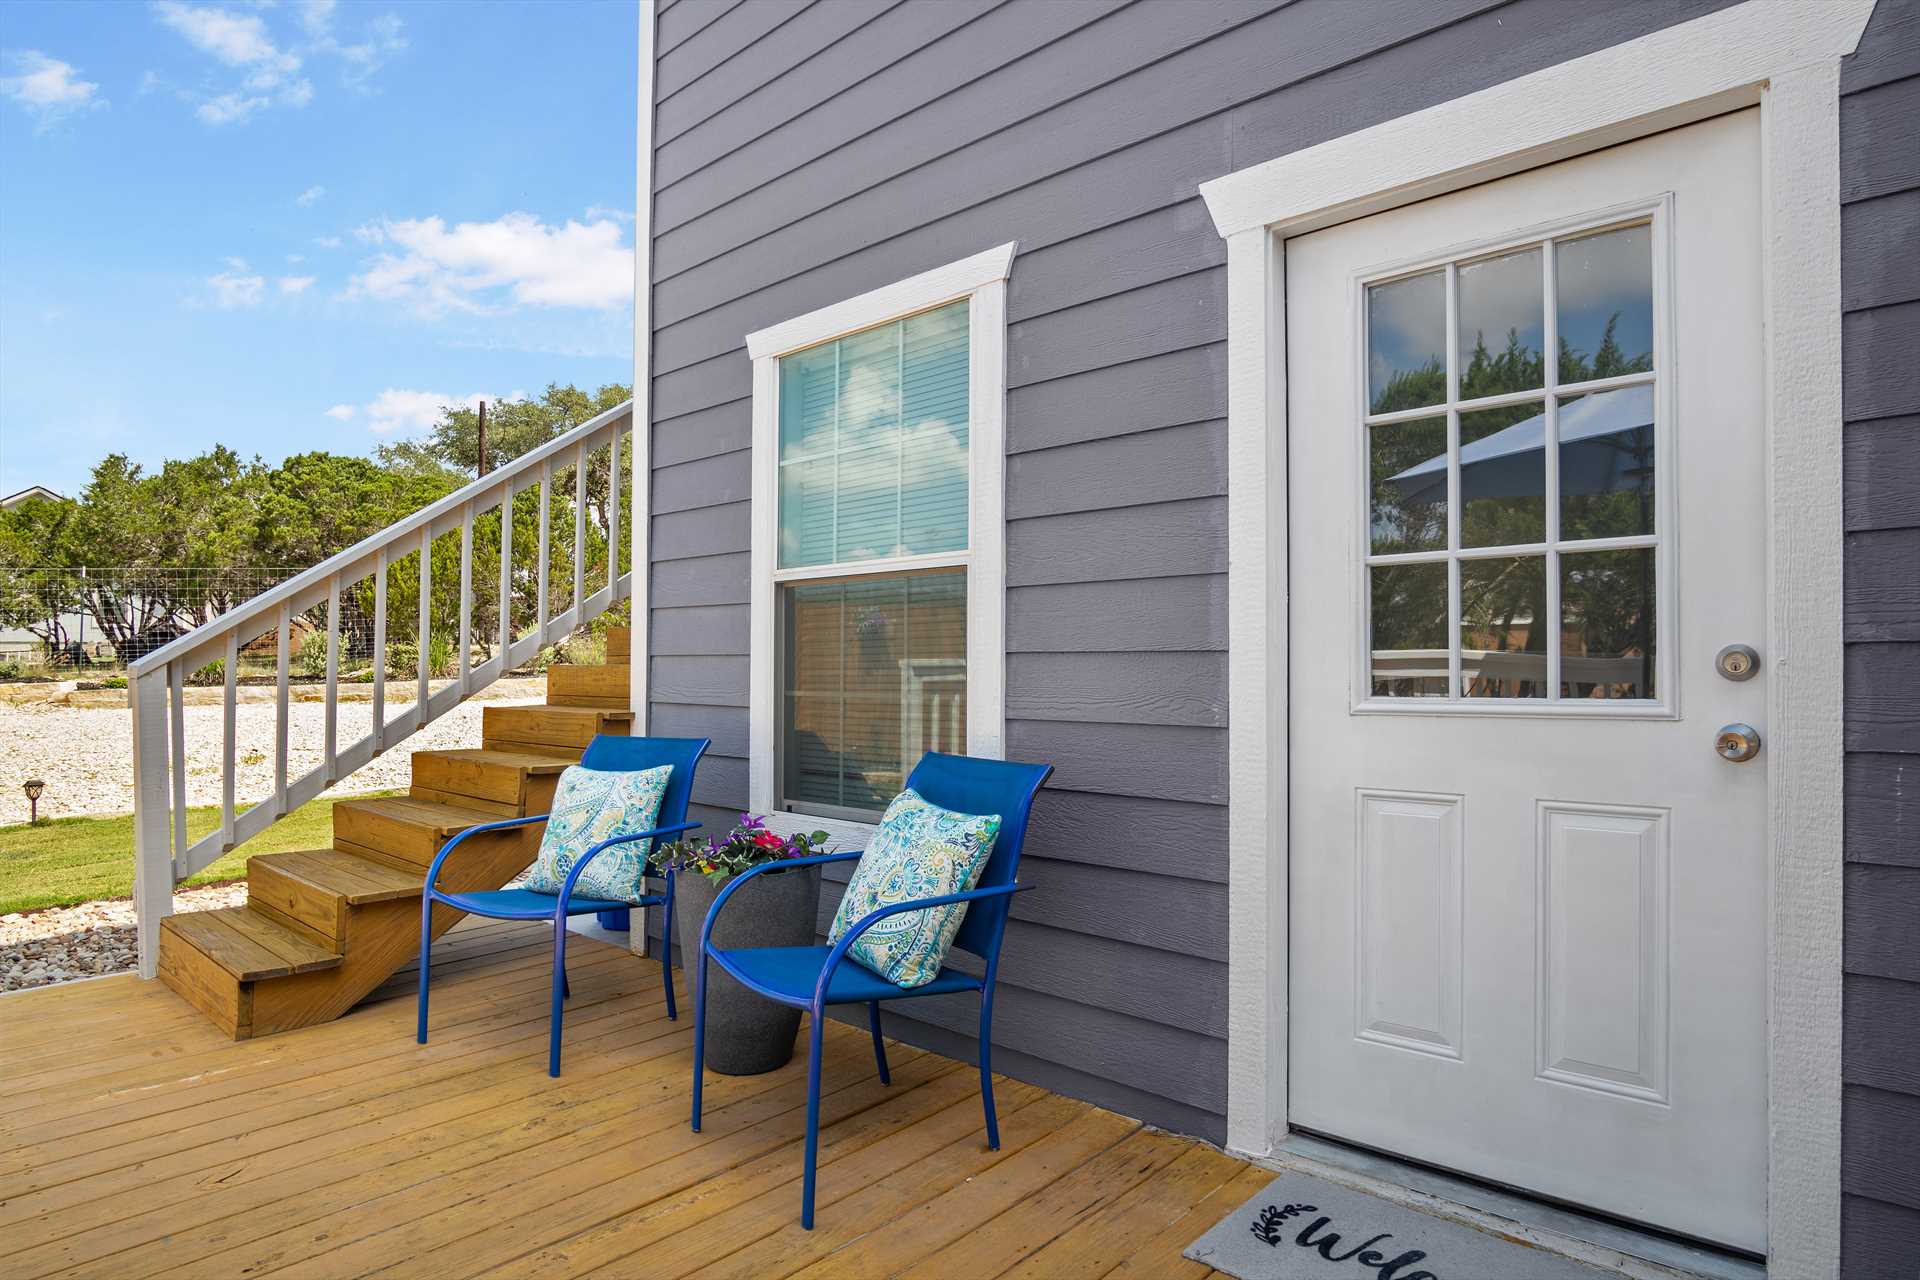                                                 For more intimate conversation, there's a cozy corner of the deck where two can chat privately.